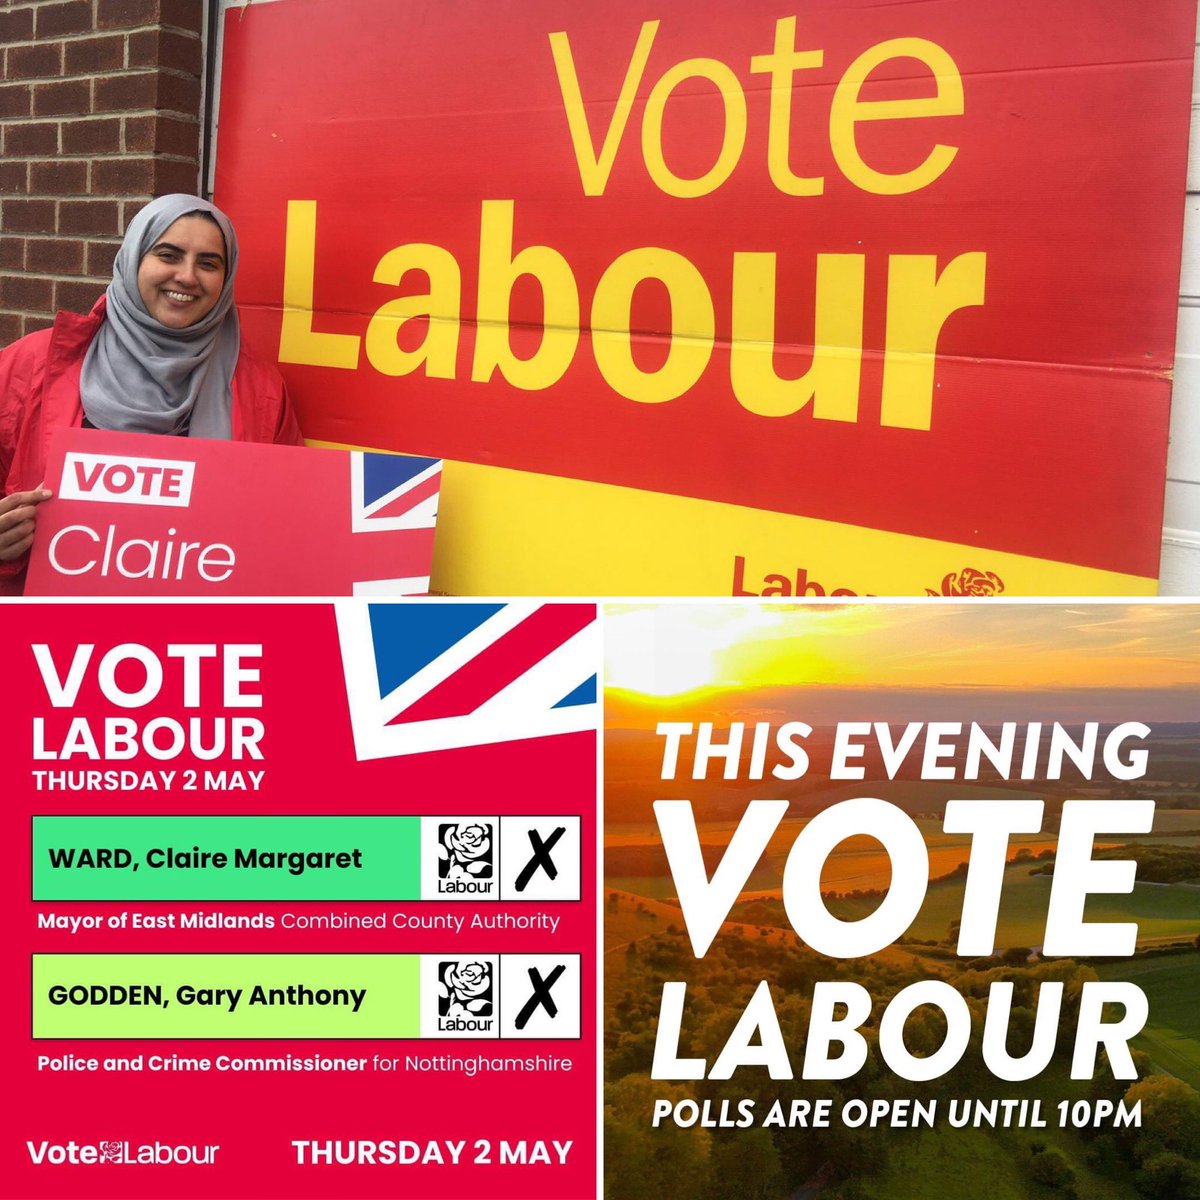 The polls are open until 10pm this evening. Make sure you get out & vote if you haven’t already. Here in Notts, it’s all about @ClaireWard4EM & @gary_godden: the @UKLabour team with the plan to get a grip on transport, housing & safer streets across our region. #VoteLabour🗳️🌹